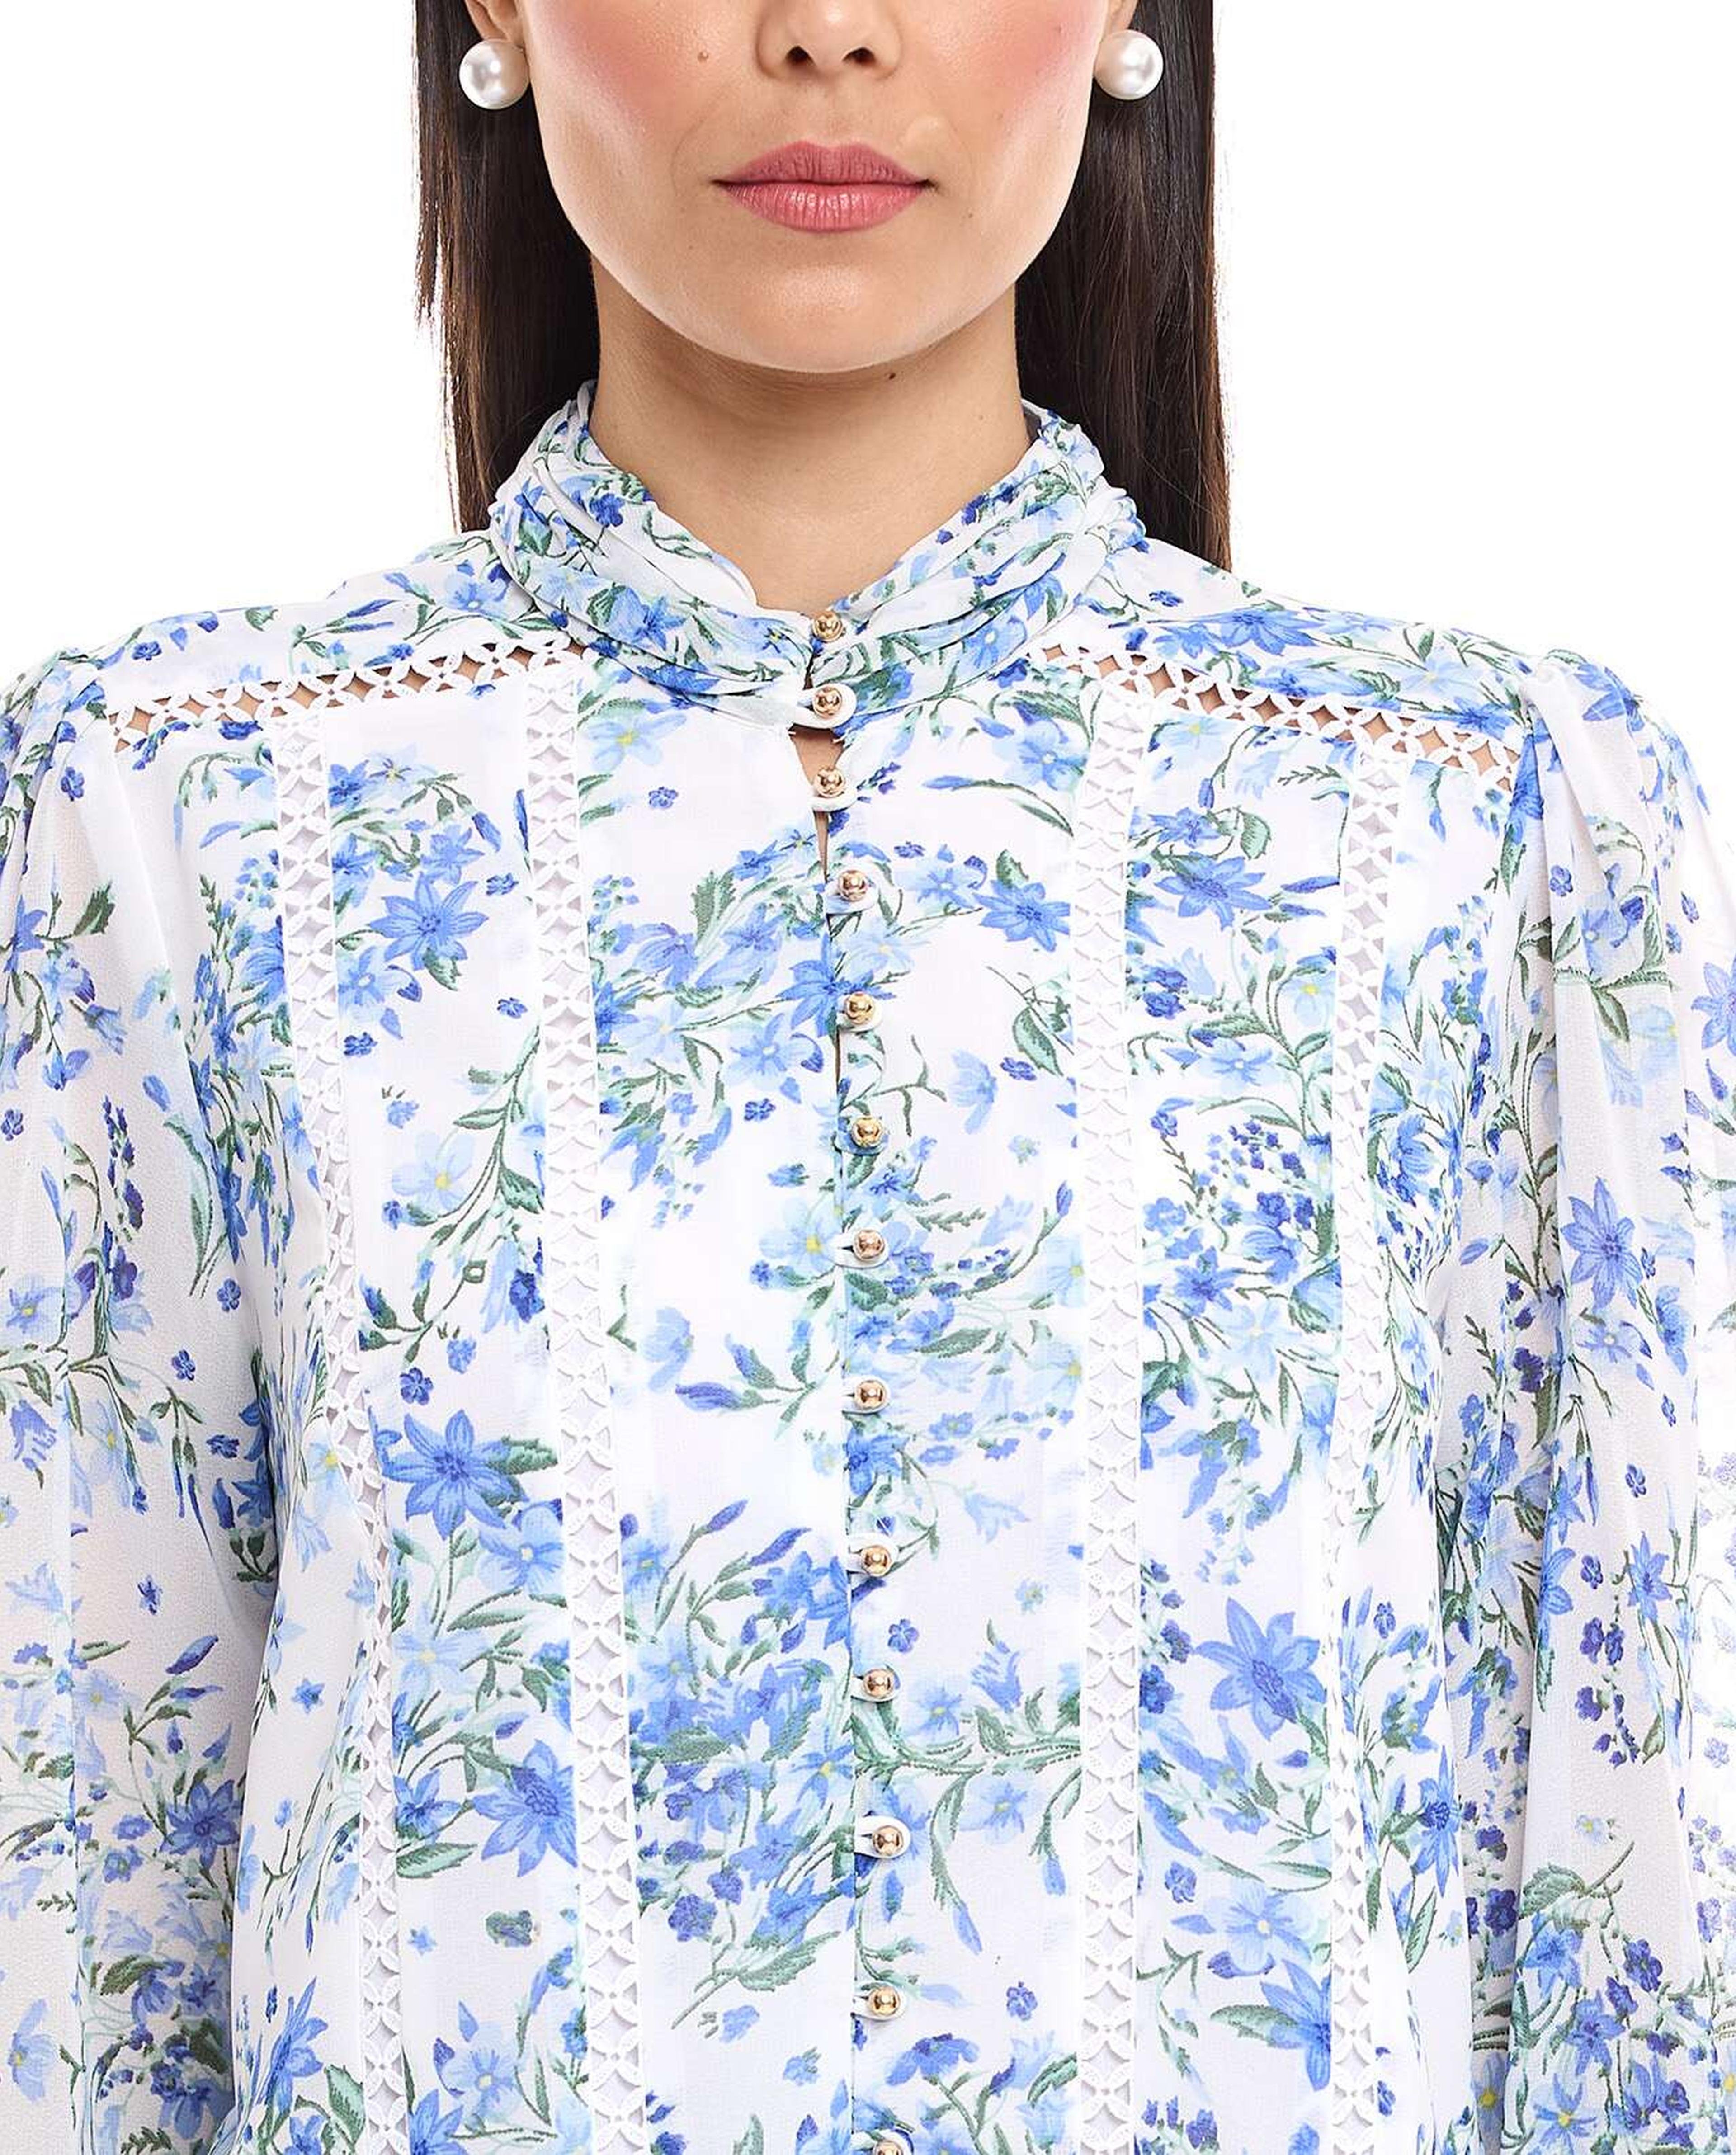 Floral Print Top with High Neck and Bishop Sleeves